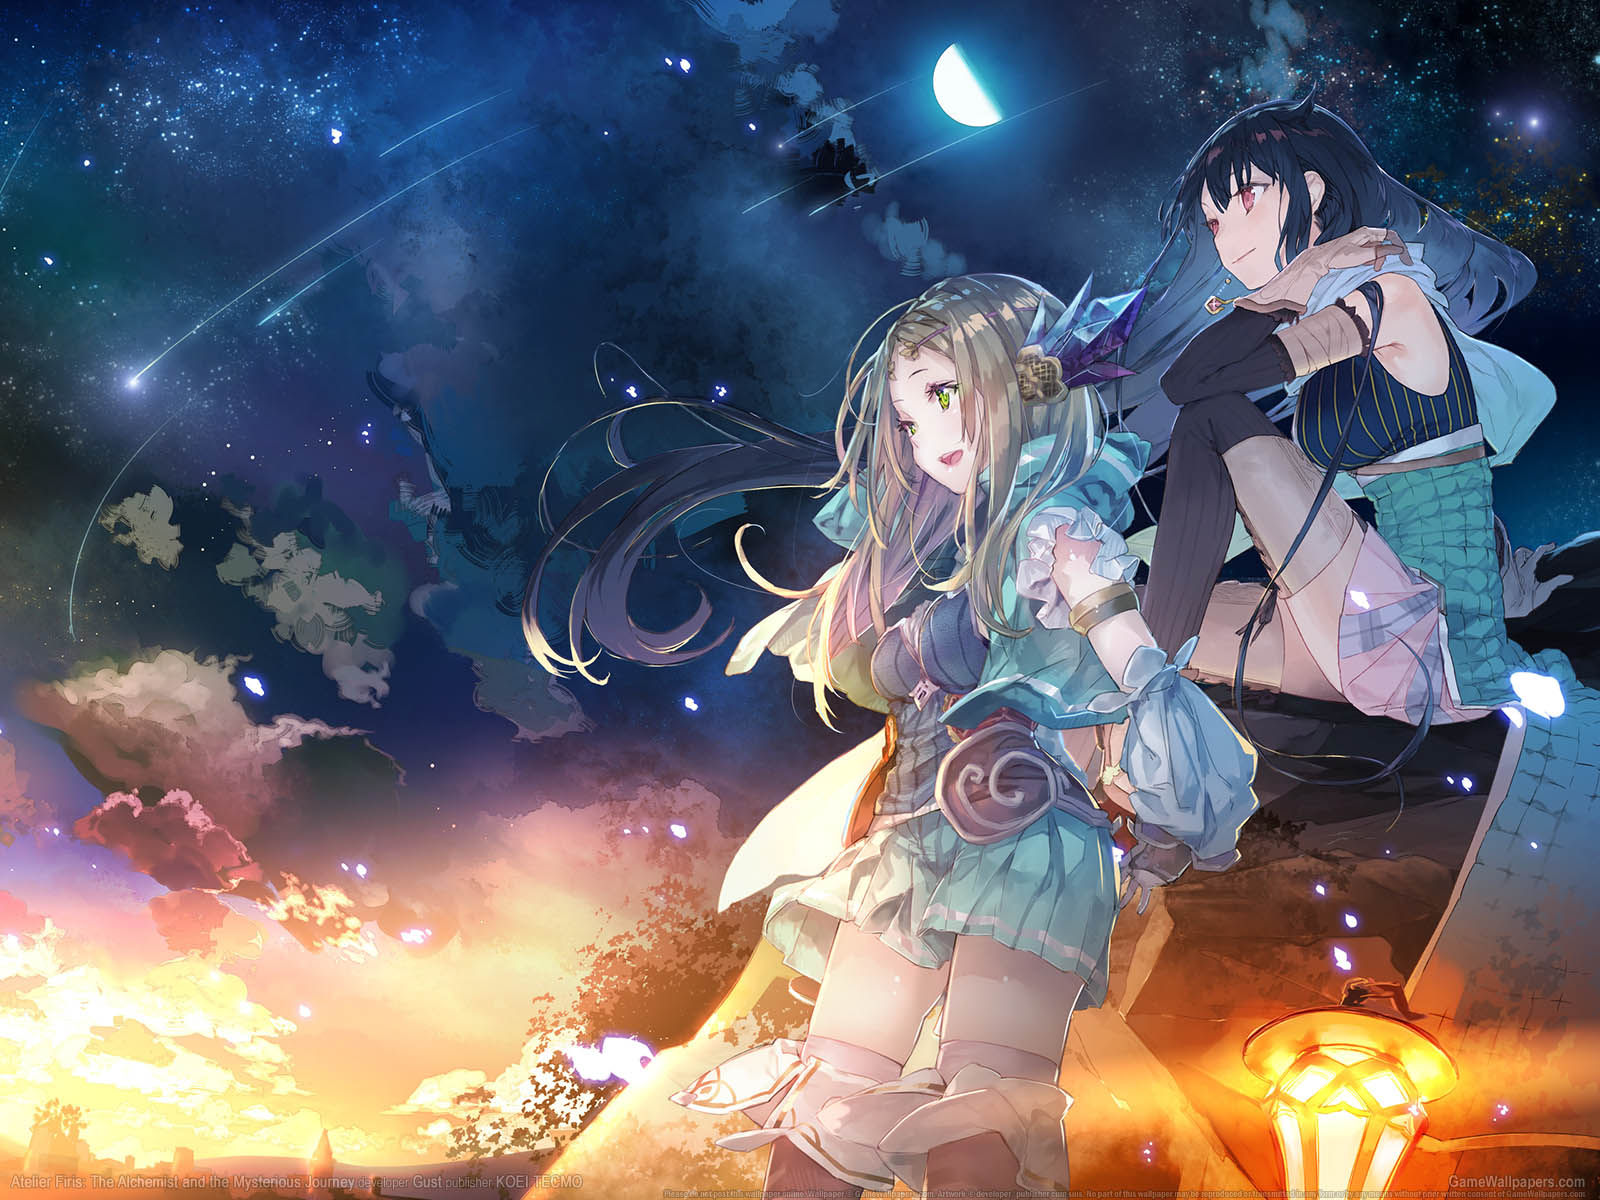 Atelier Firis: The Alchemist and the Mysterious Journeyνmmer=01 achtergrond  1600x1200